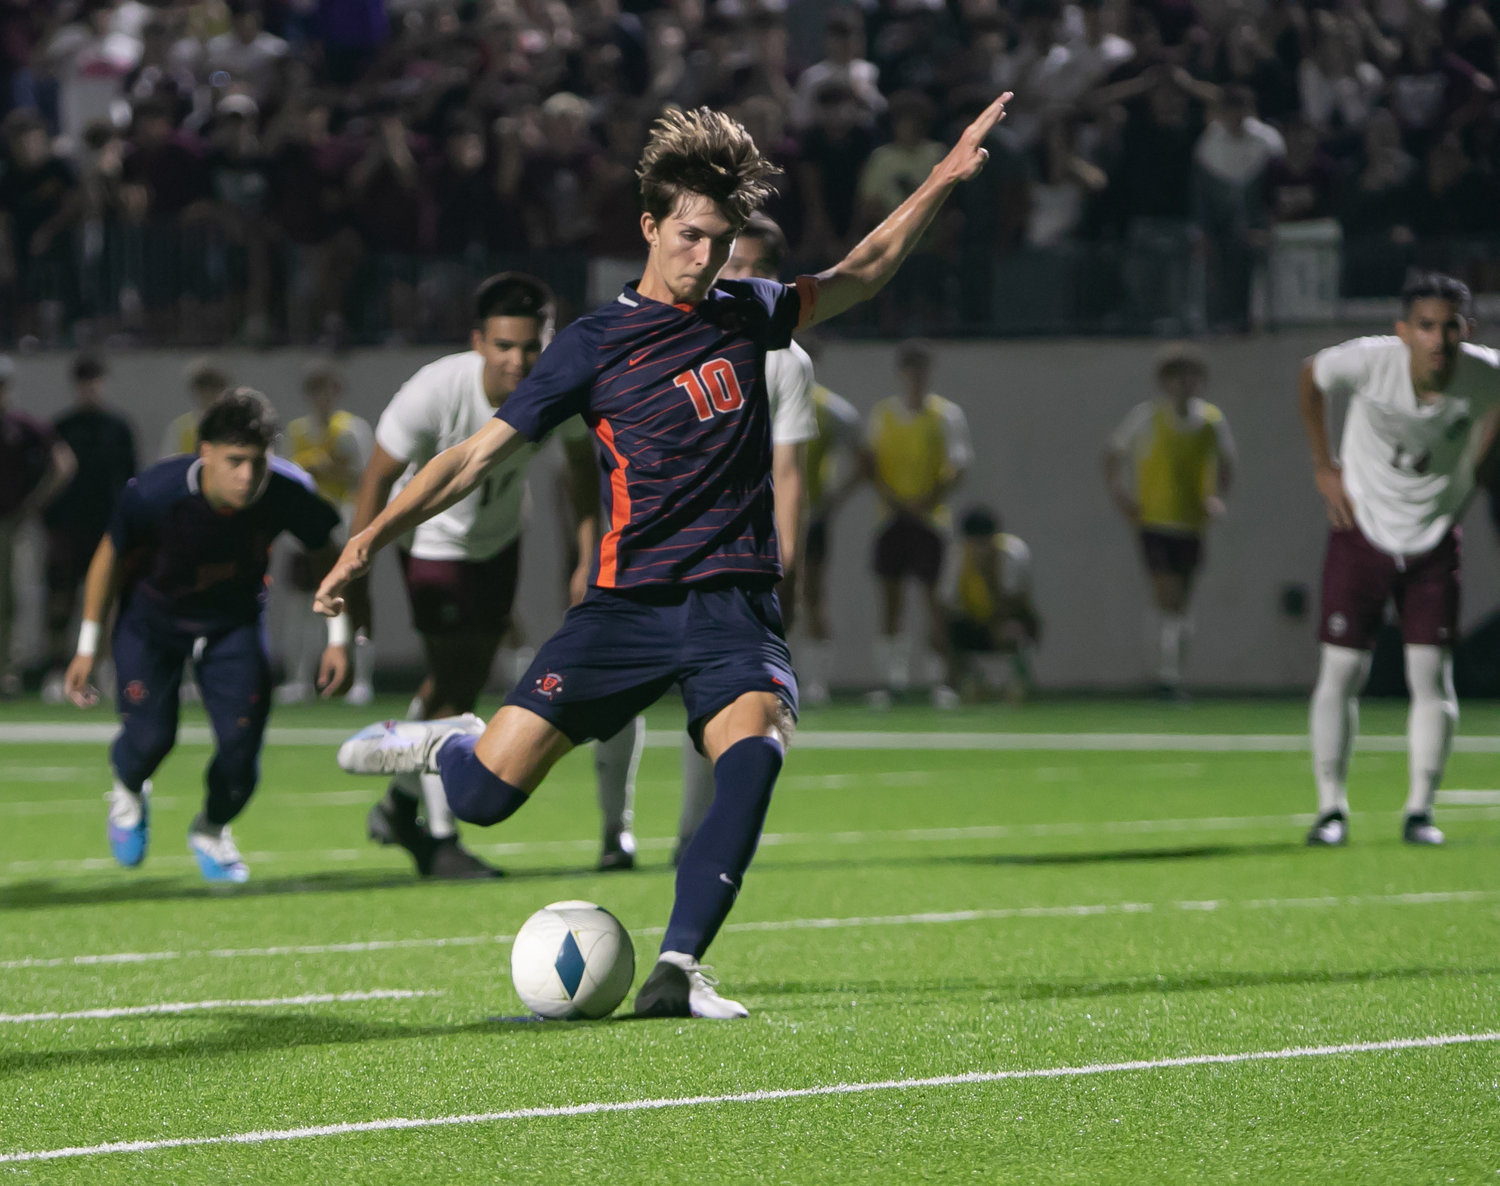 Aidan Morrison takes a penalty kick during Friday's Class 6A Regional Quarterfinal game between Seven Lakes and Cinco Ranch at Legacy Stadium.